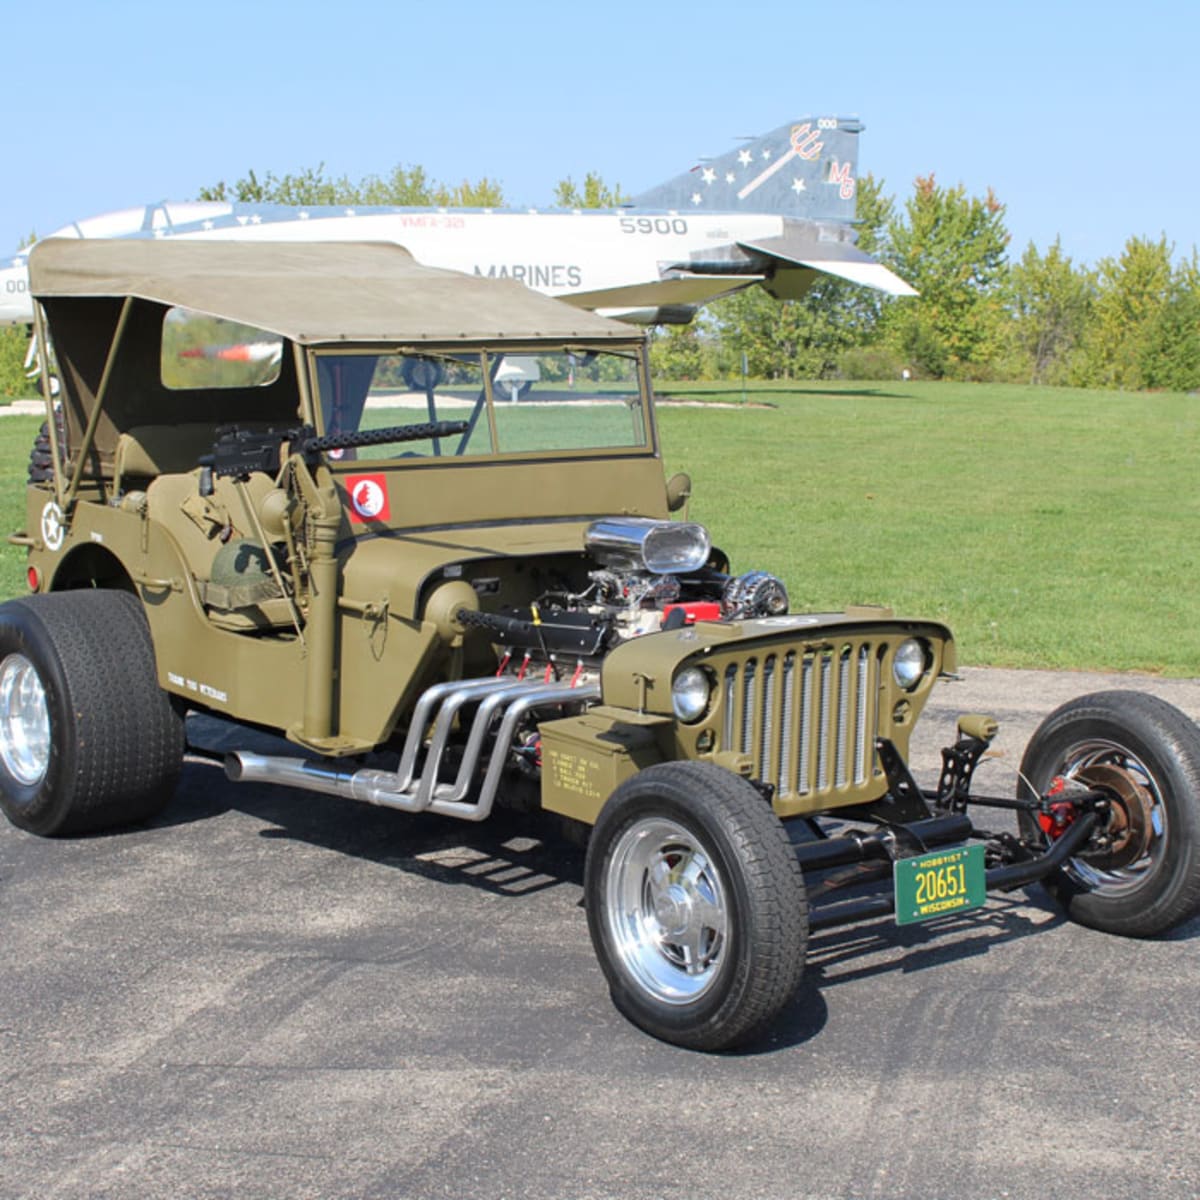 Car of the Week: 1946 Jeep Hot Rod - Old Cars Weekly